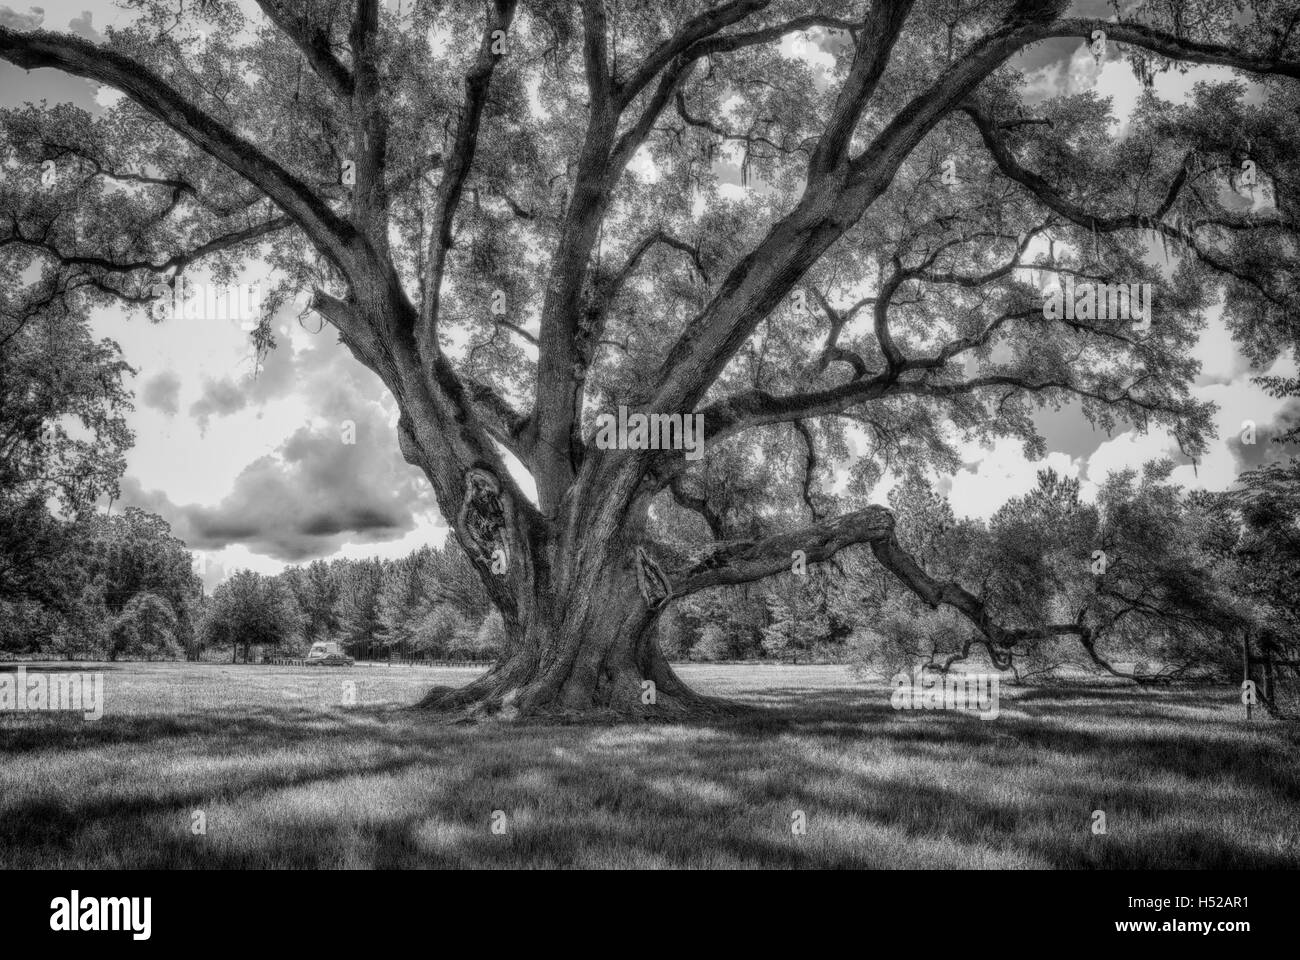 The Cellon Oak Park near Gainesville, Florida, contains the Florida State Champion Live Oak.  It is an Alachua County Park. Stock Photo